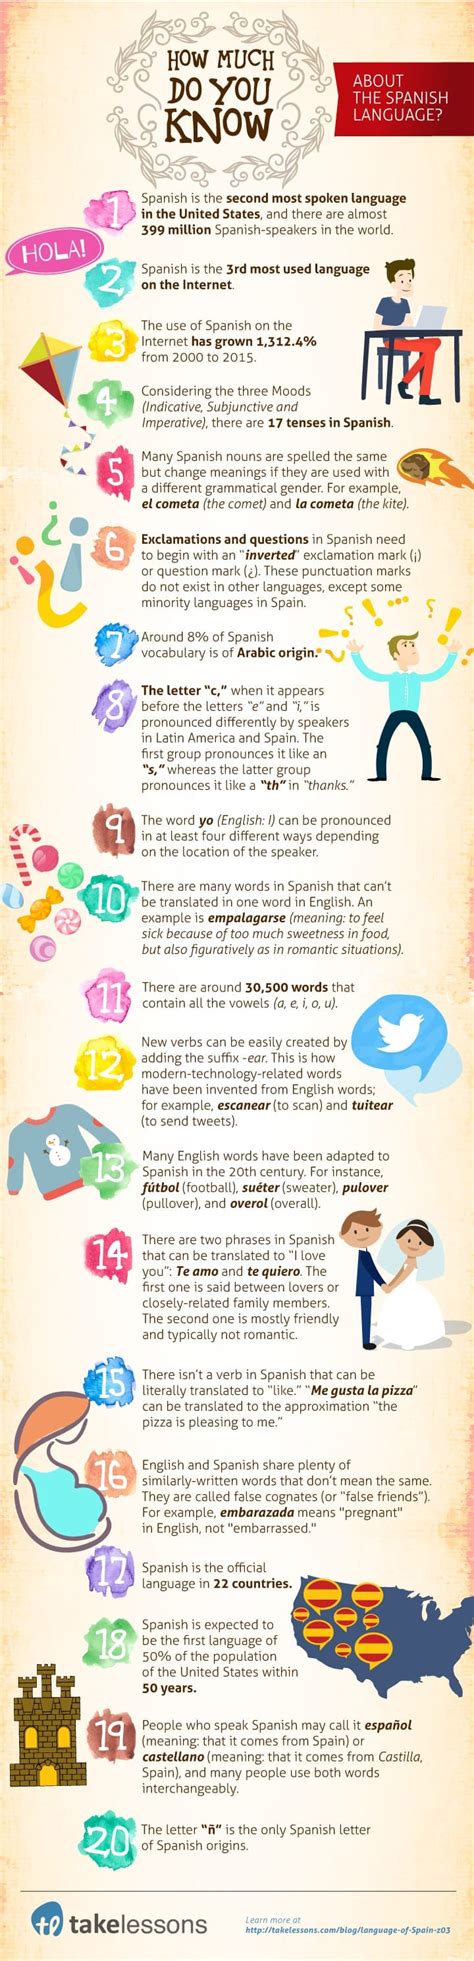 Continue reading to learn them and get. 50 Fascinating Facts About the Spanish Language Infographic